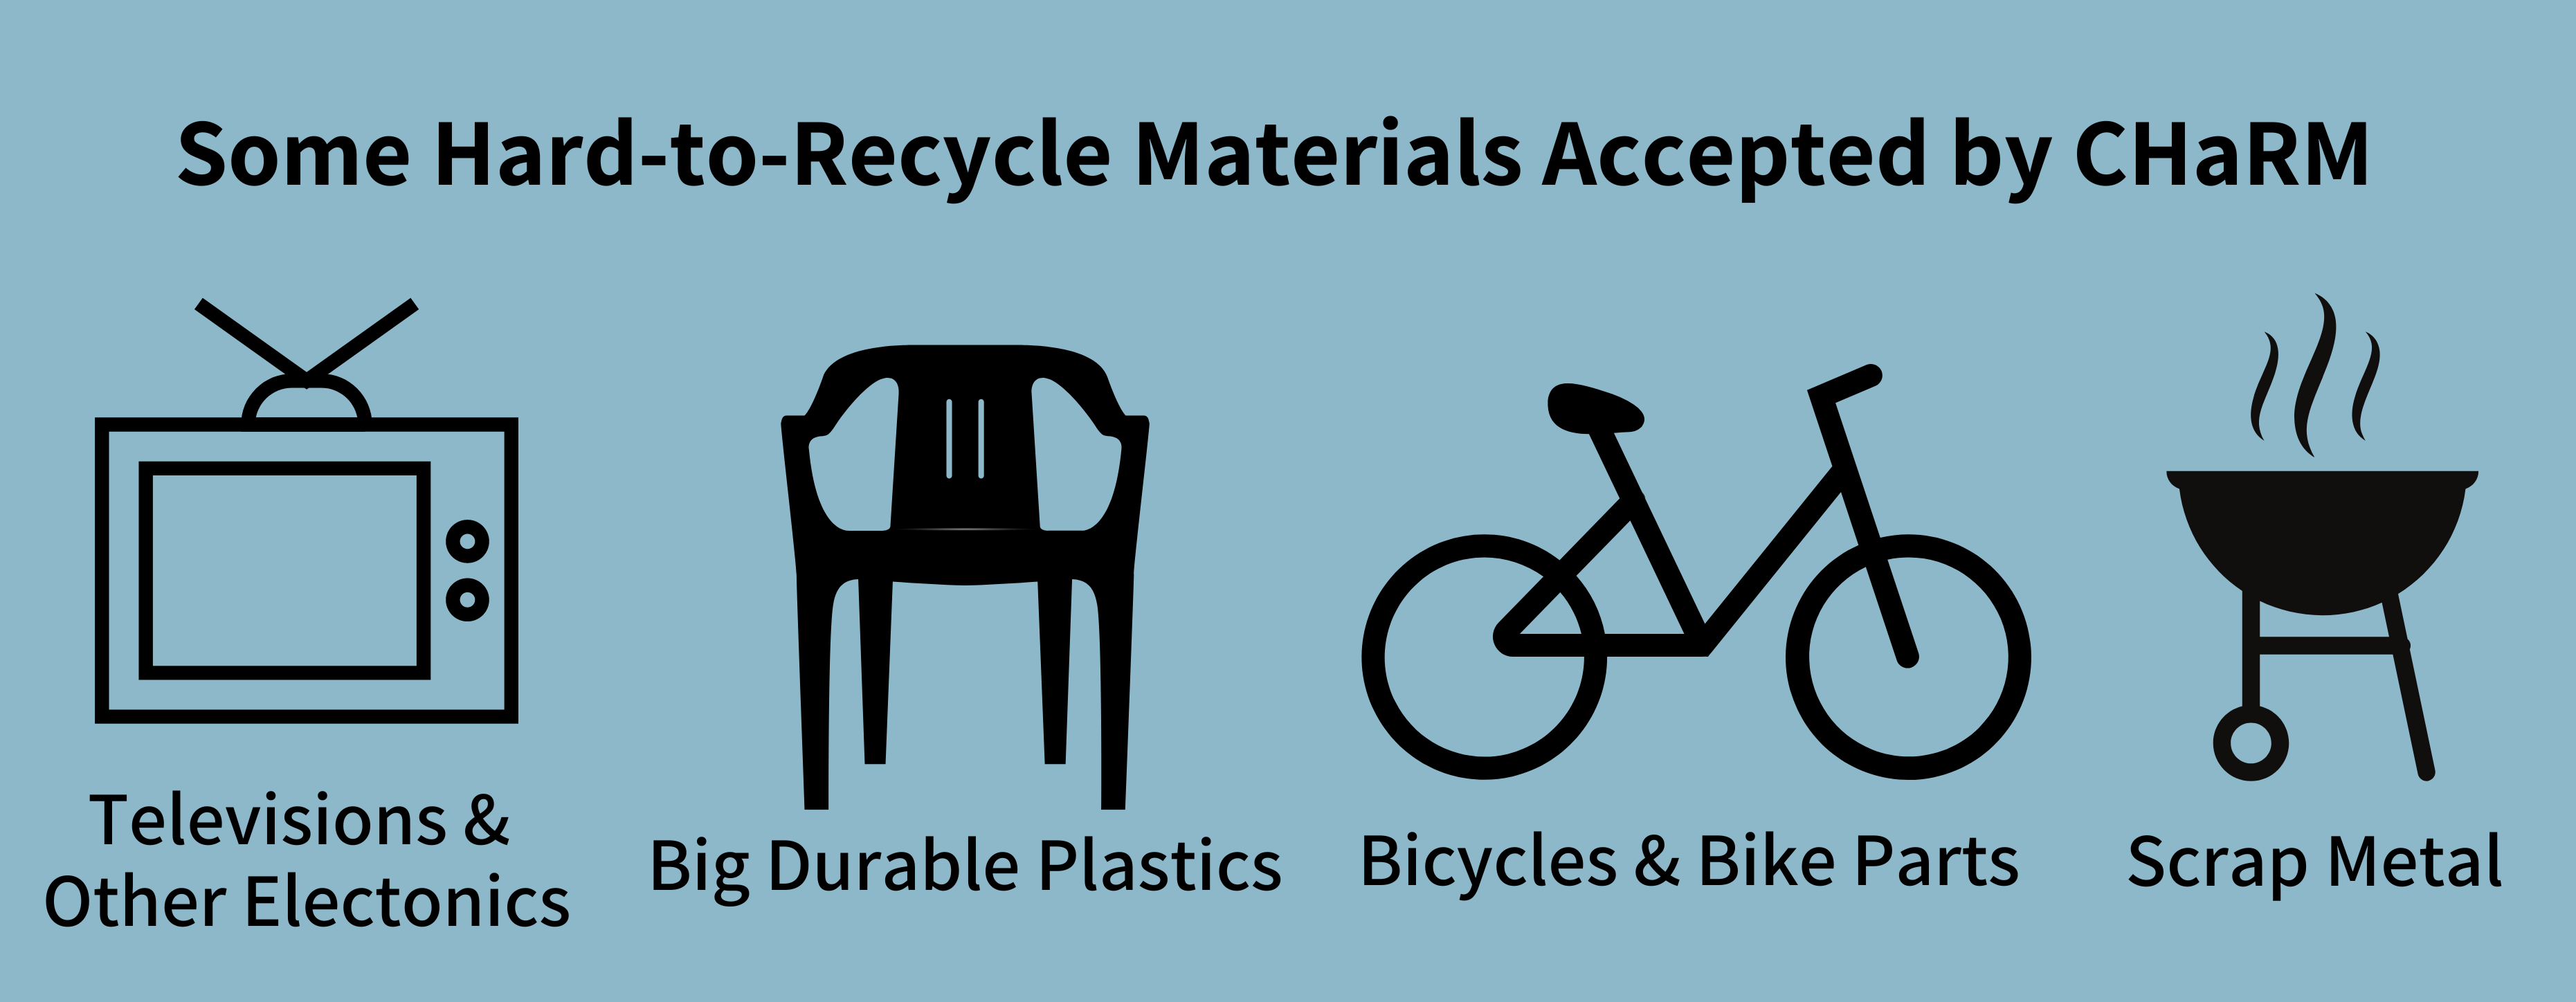 Some hard-to-recycle materials accepted by CHaRM: Televisions and other electronics, big durable plastics, bicycles and bike parts, and scrap metal.